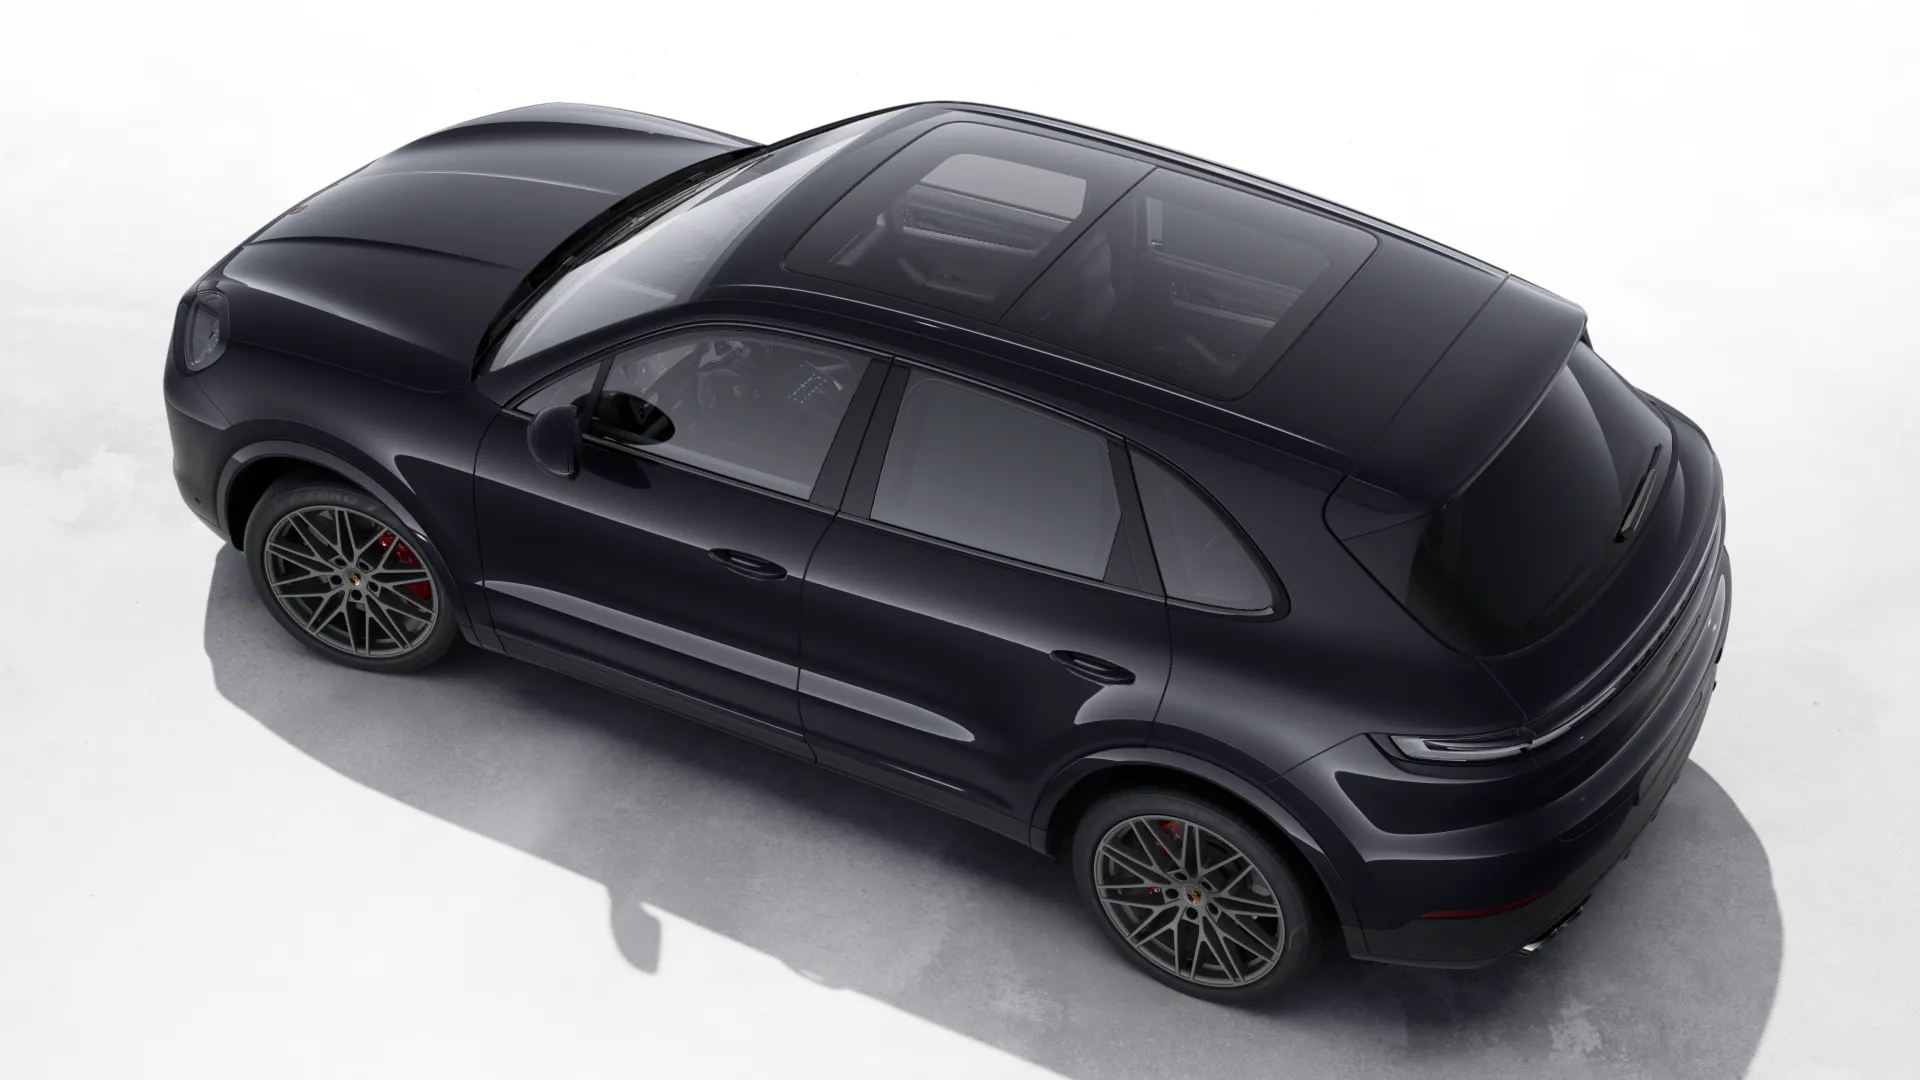 Exterior view of The New Cayenne S